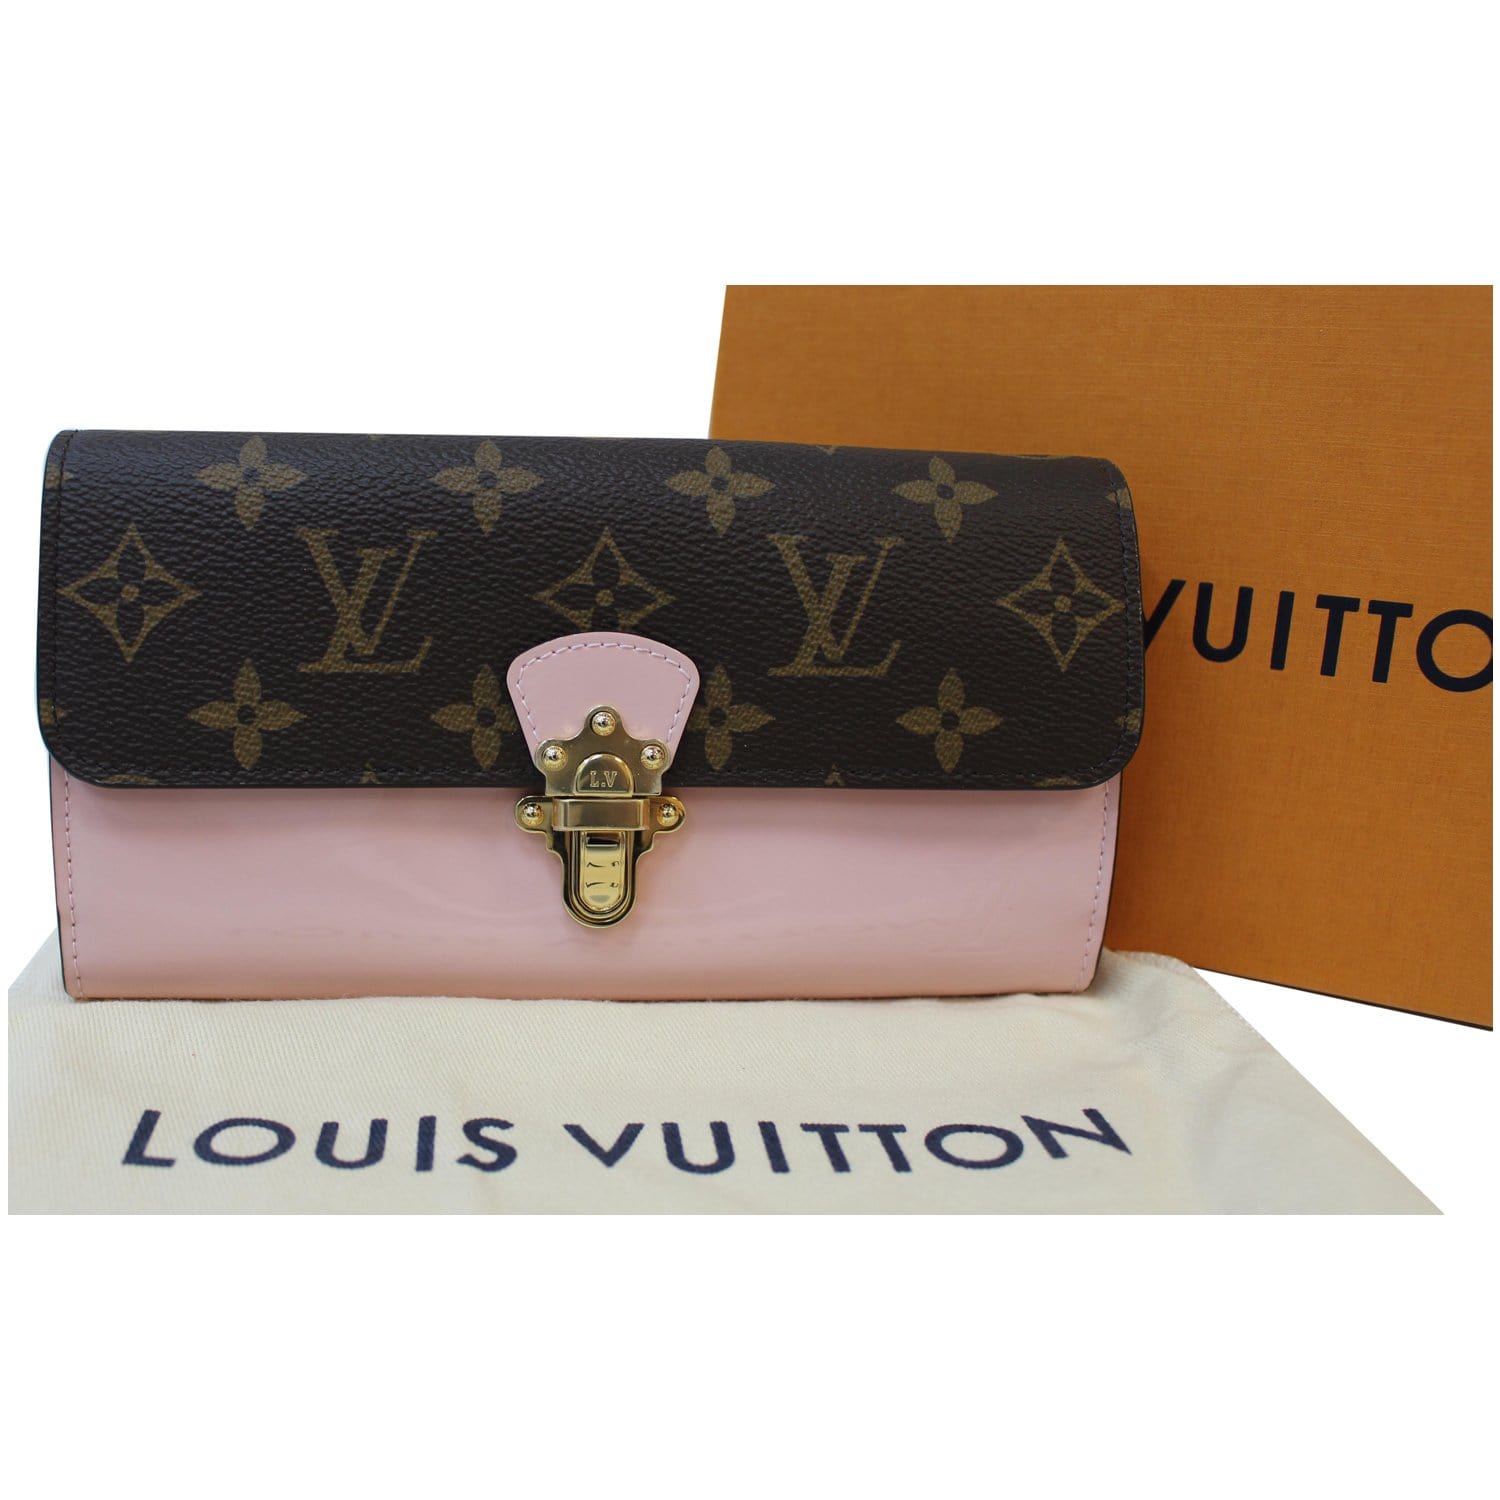 Unboxing: My new Louis Vuitton Vernis Cosmetic Pouch!!! 